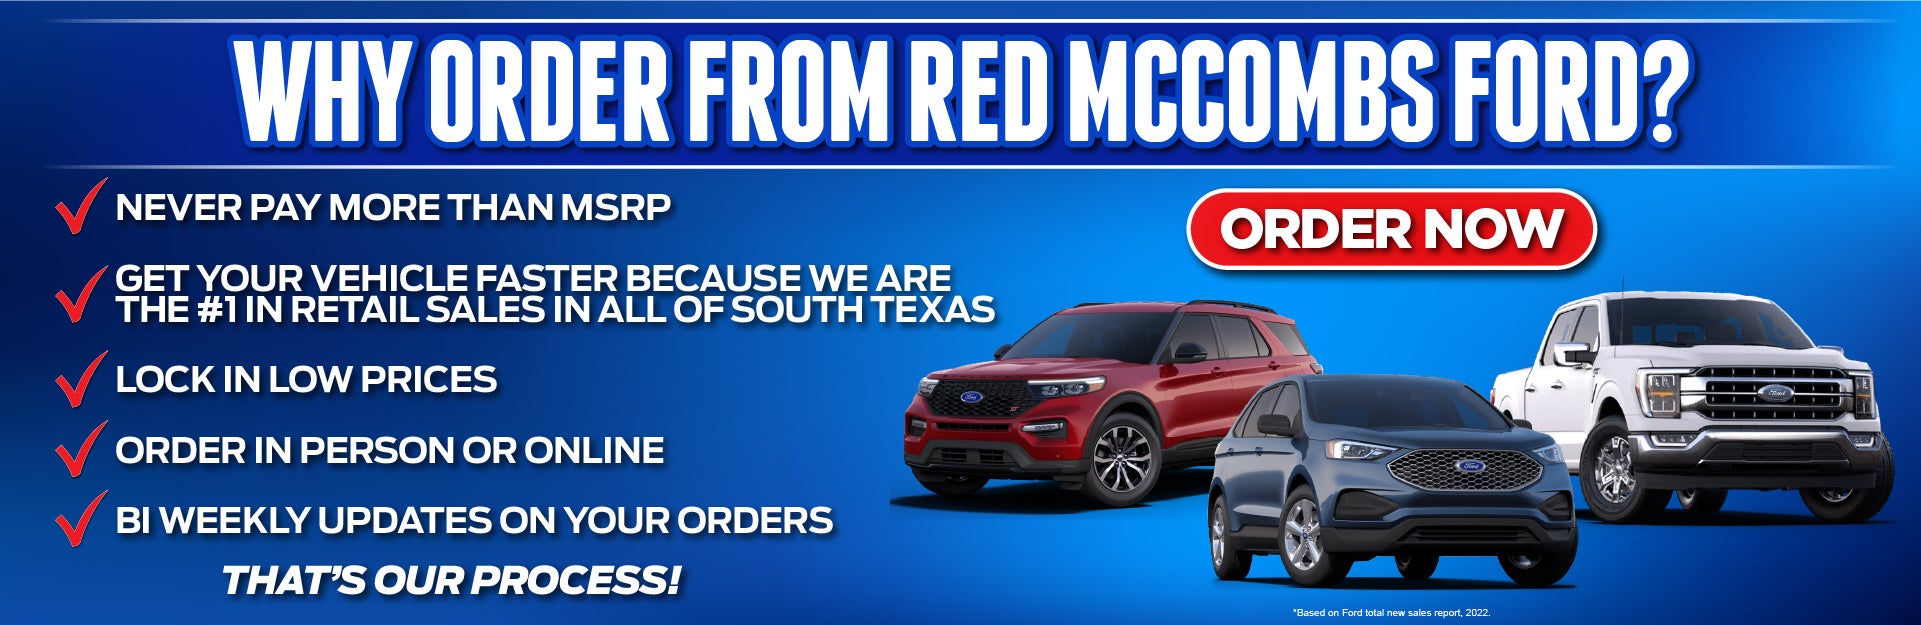 Order from Red McCombs Ford!